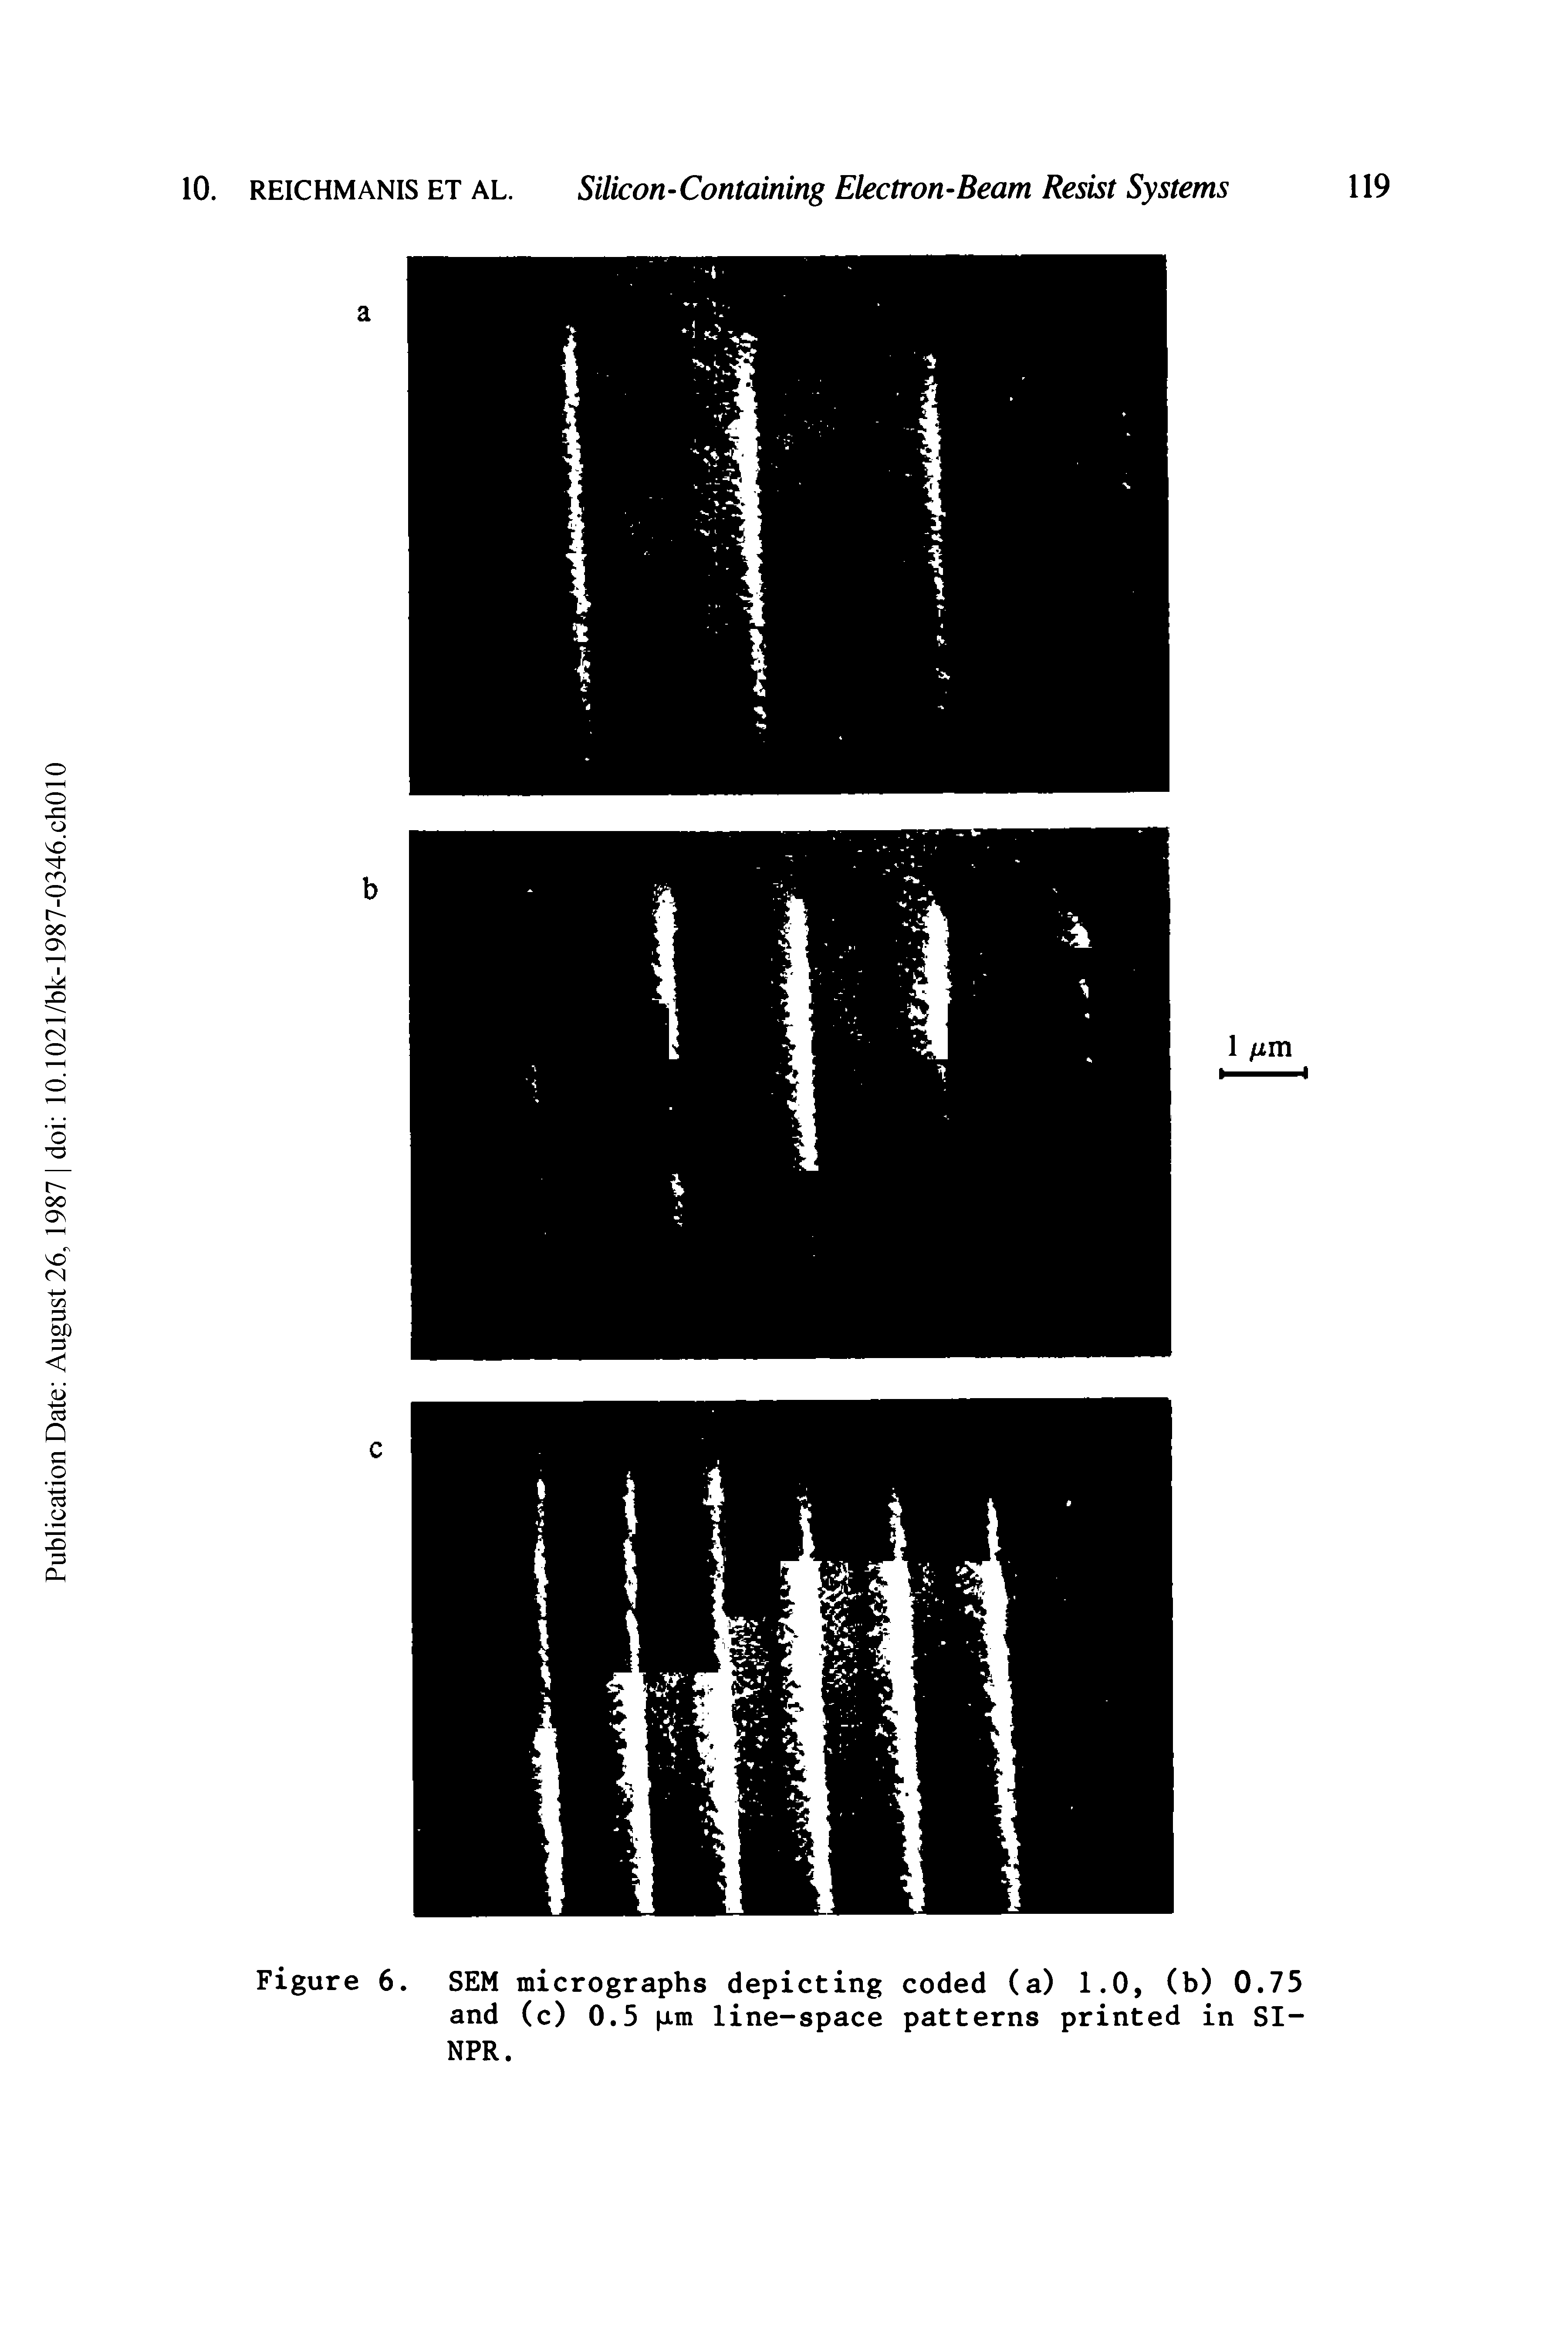 Figure 6. SEM micrographs depicting coded (a) 1.0, (b) 0.75 and (c) 0.5 jim line-space patterns printed in SI-NPR.